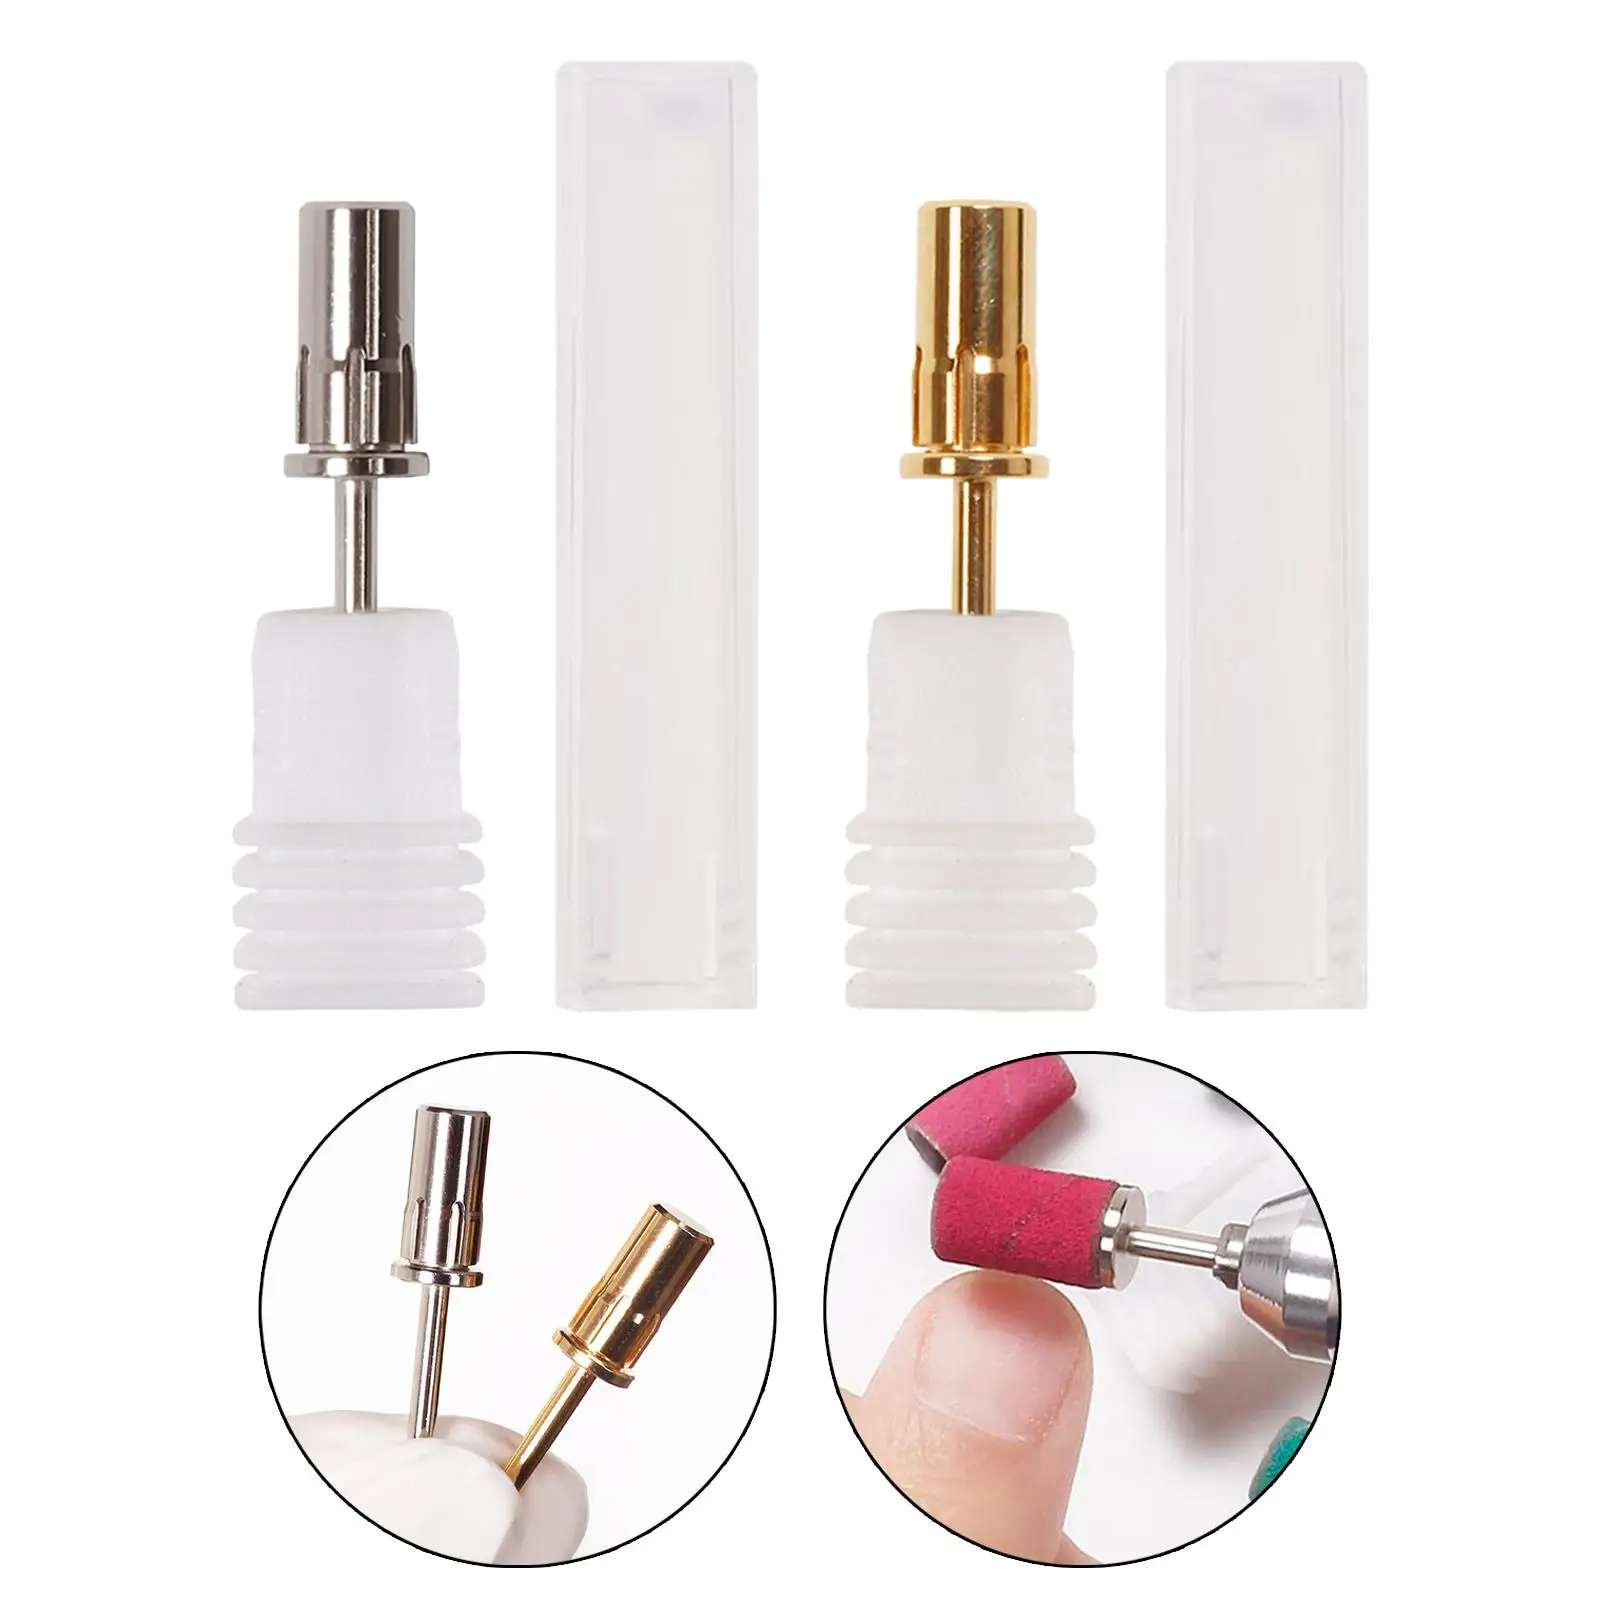 Nail Drill Bit Durable Stainless Steel High Performance Shaft Nail Drill Bits for Sanding Band and Manicure Acrylics Gel Nails